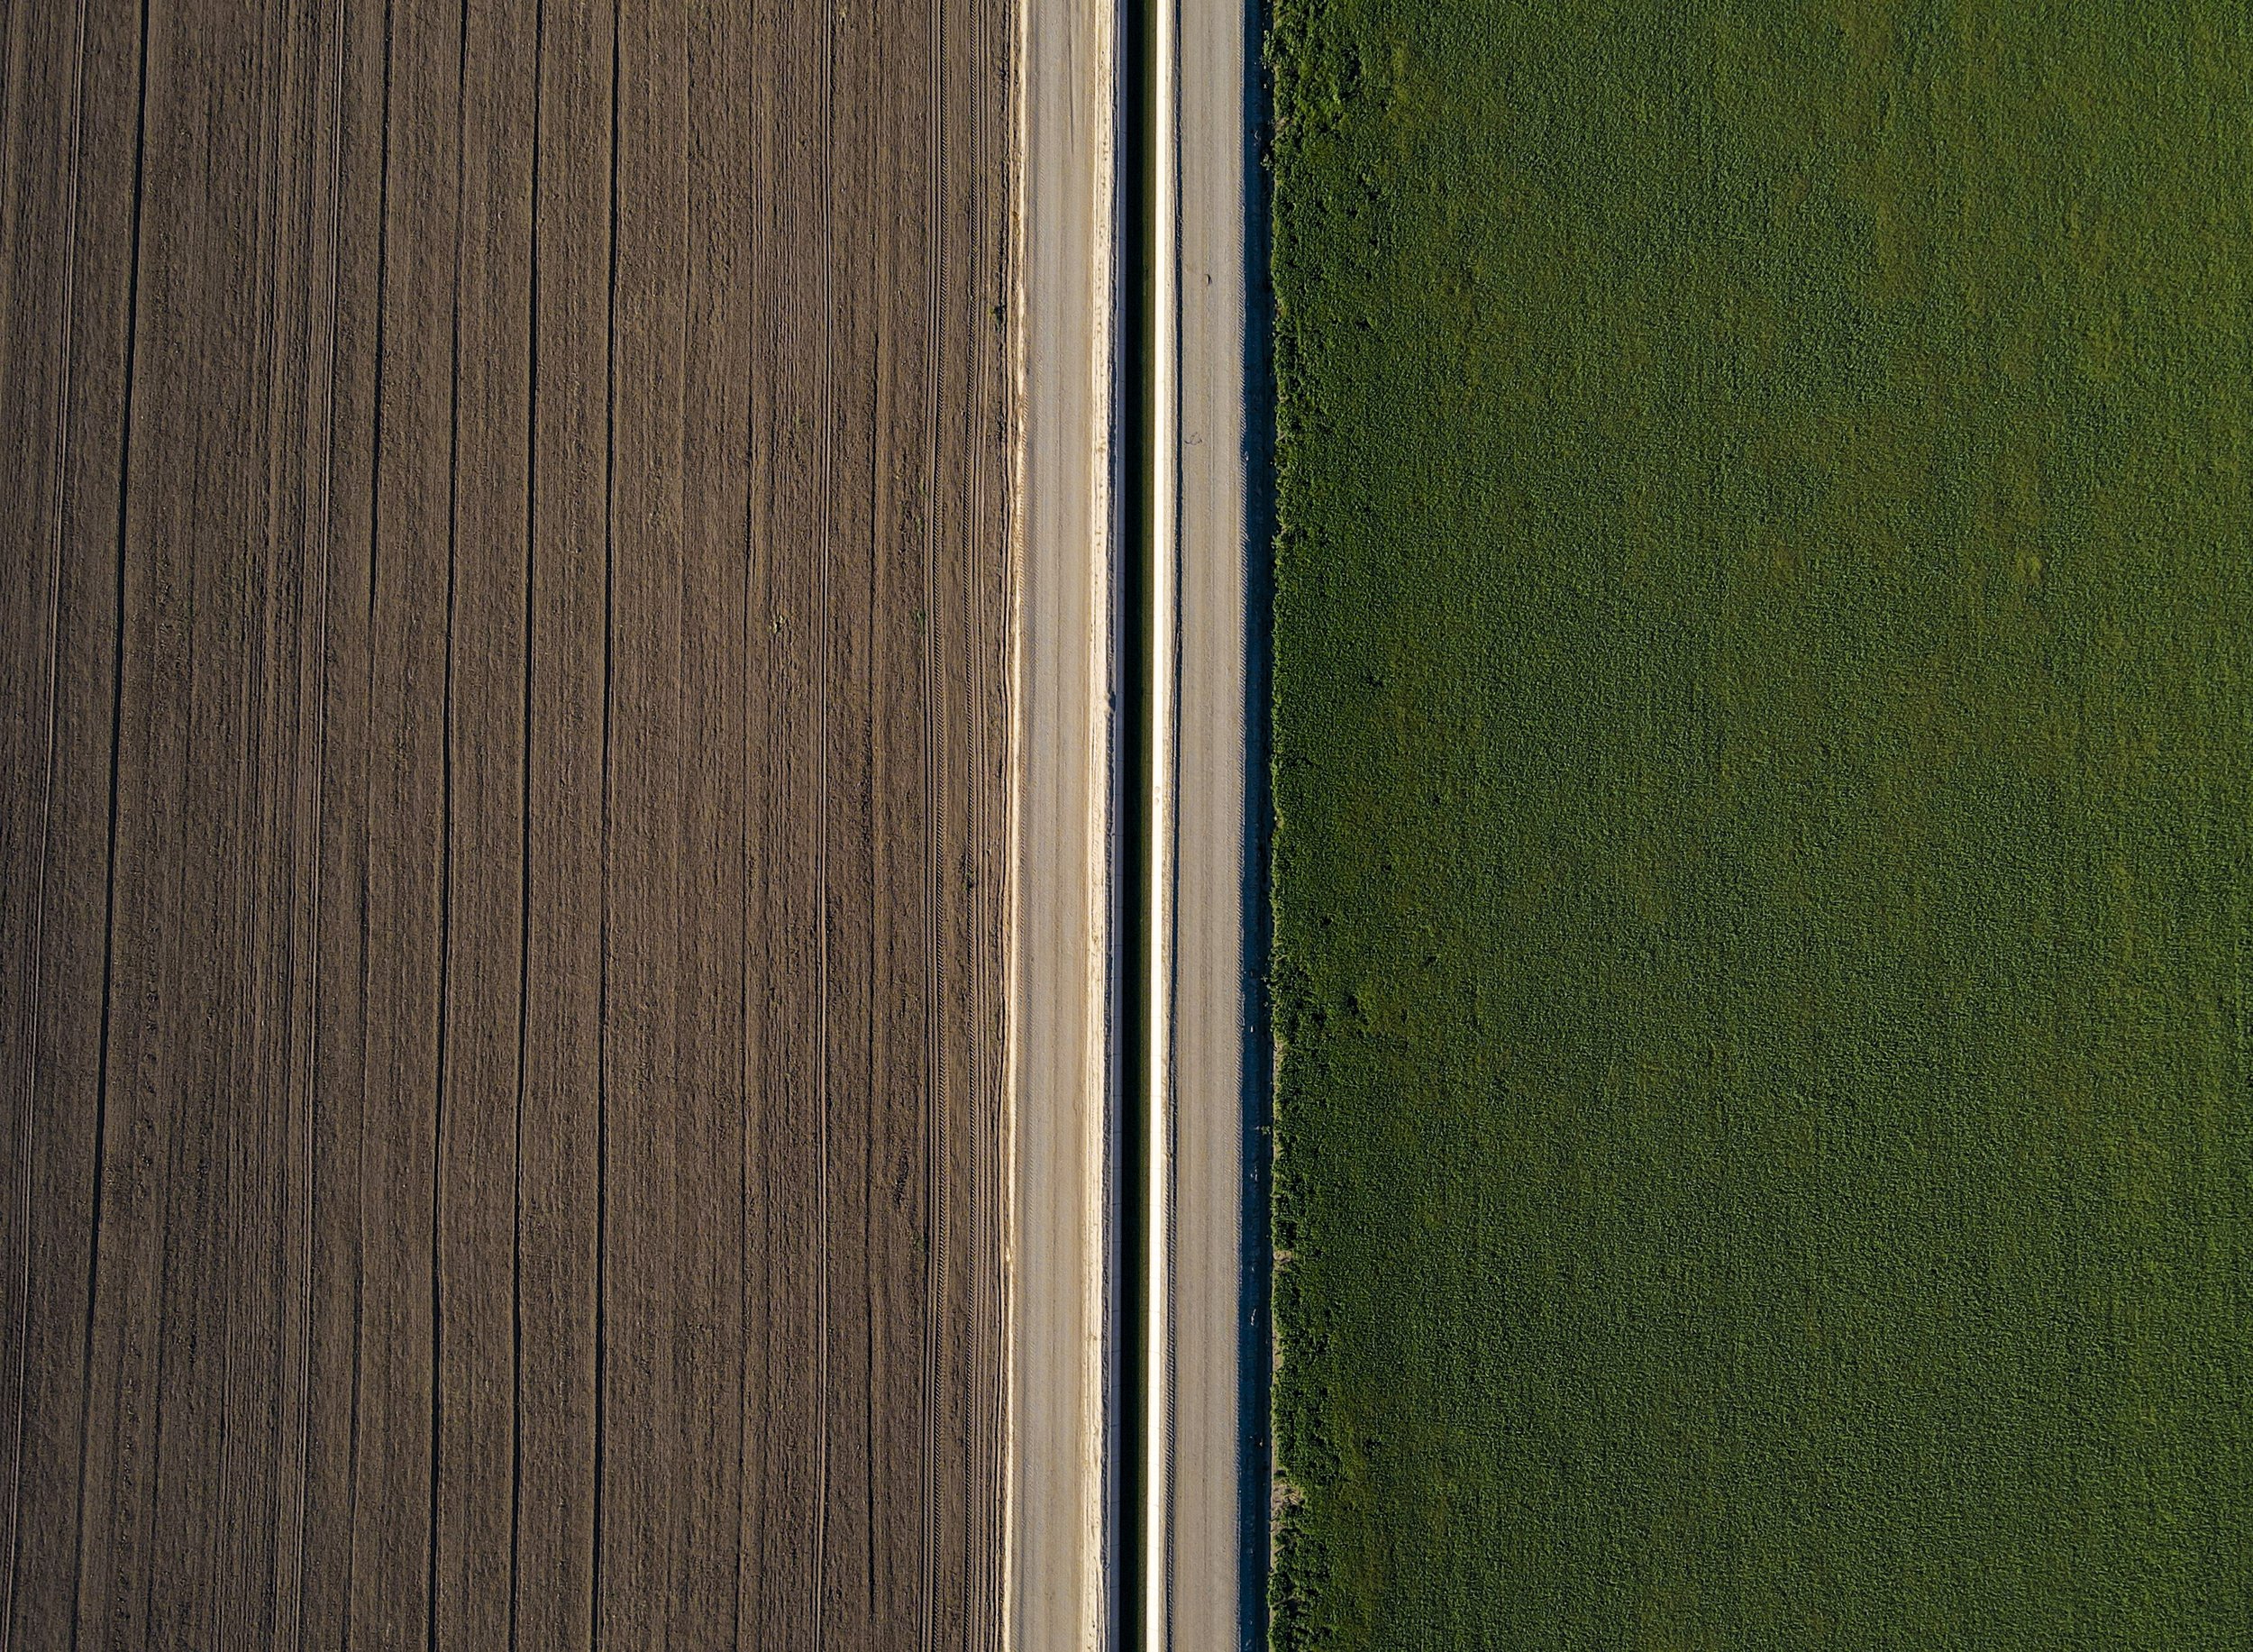  A fallowed field (left) is seen alongside a field of alfalfa separated by an irrigation canal on Debra Keenan's farmland in Ripley, Calif., Wednesday. The state’s fallow program pays farmers to not work their fields in order to conserve water from t